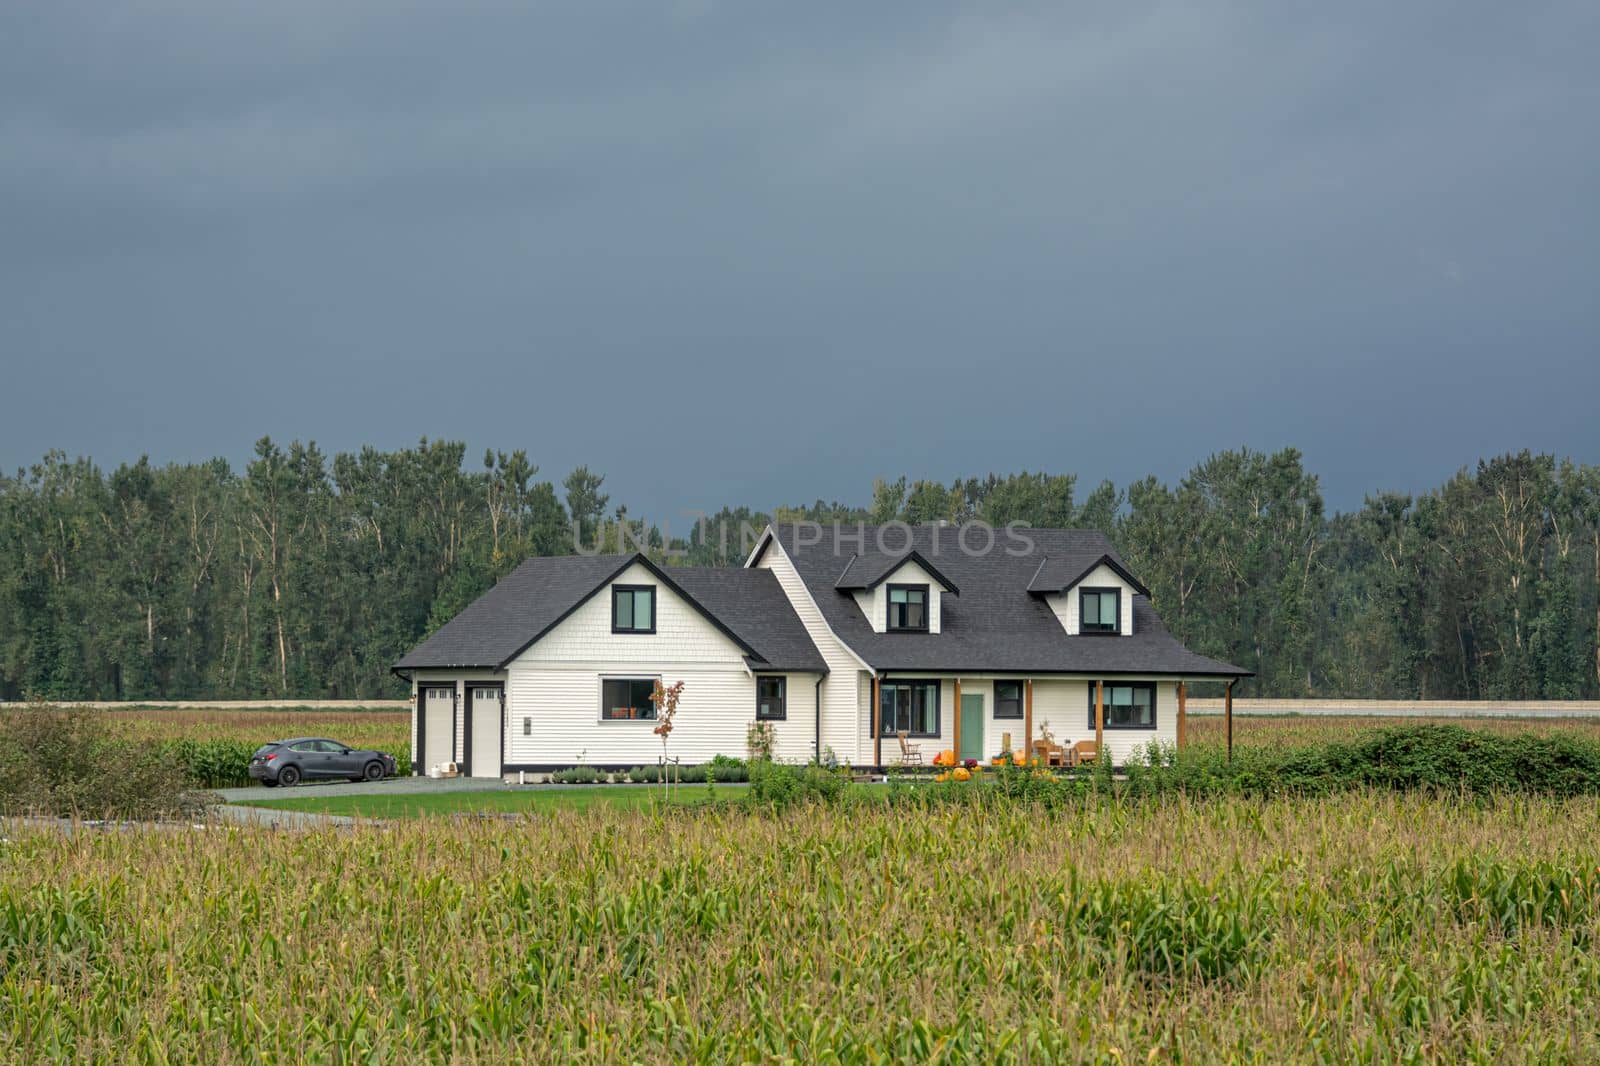 Brand new farmer's house in the middle of corn field on stormy sky background